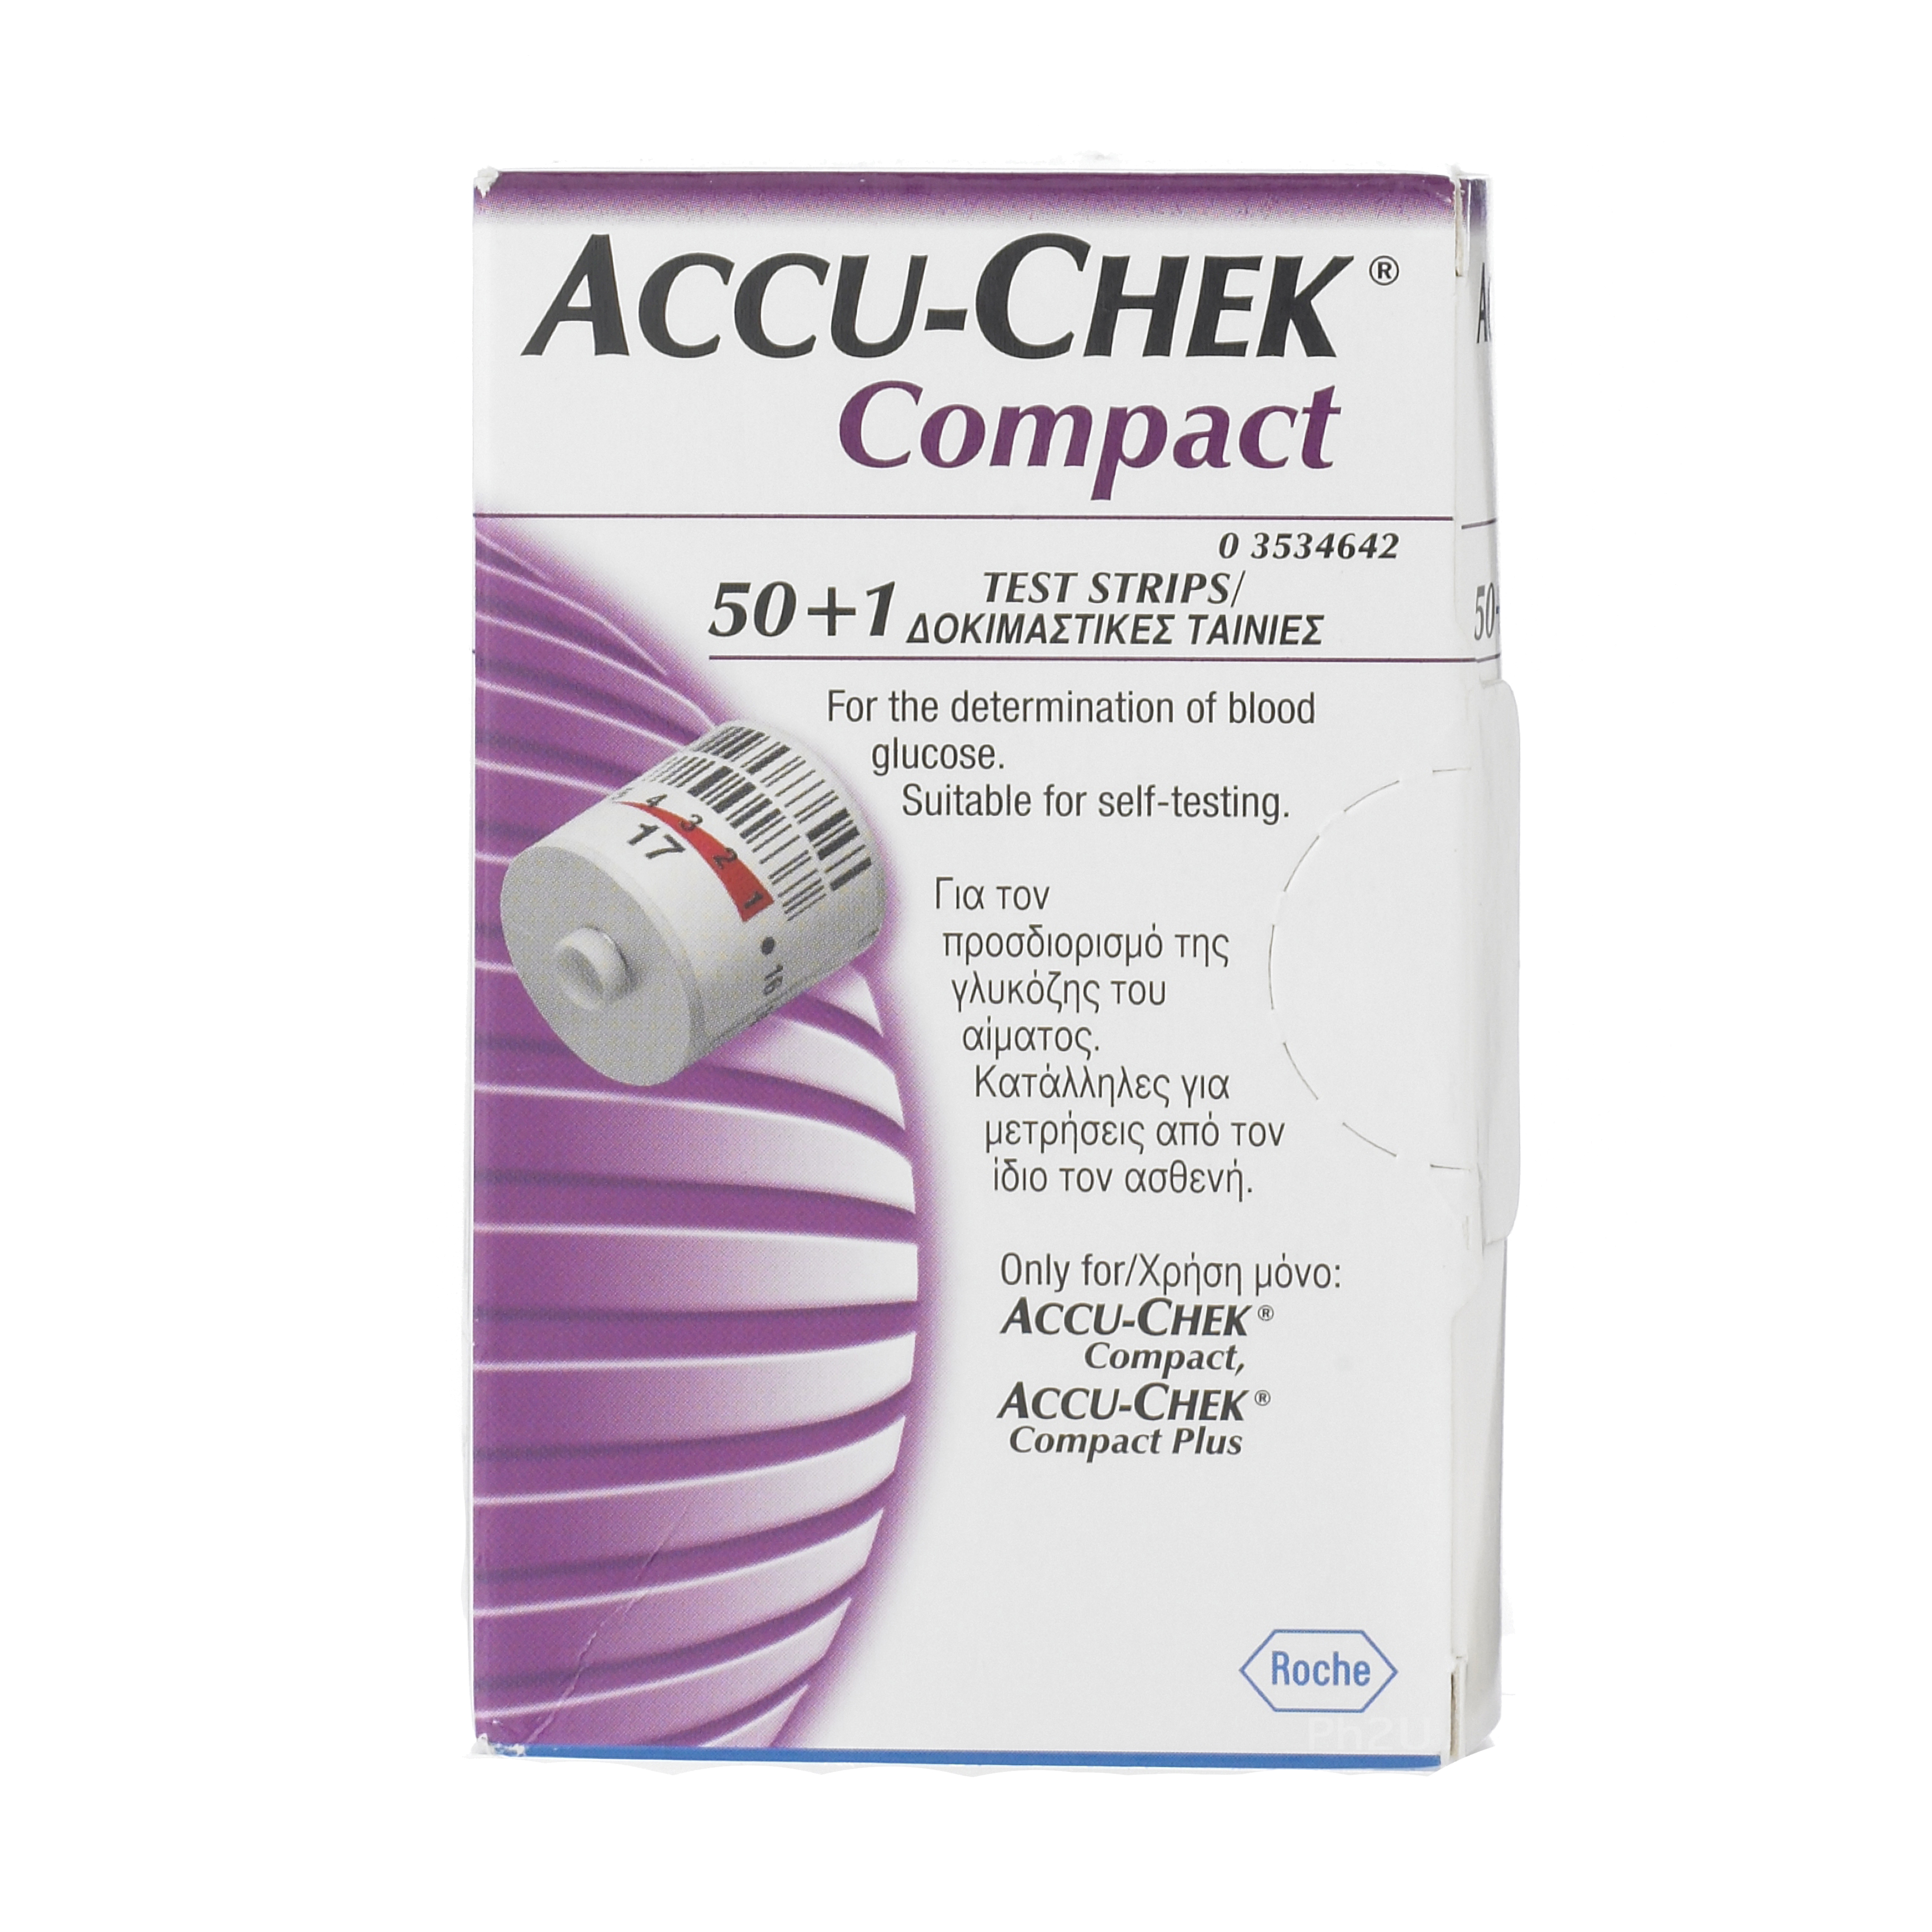 For blood glucose monitoring with Accu-Chek Compac